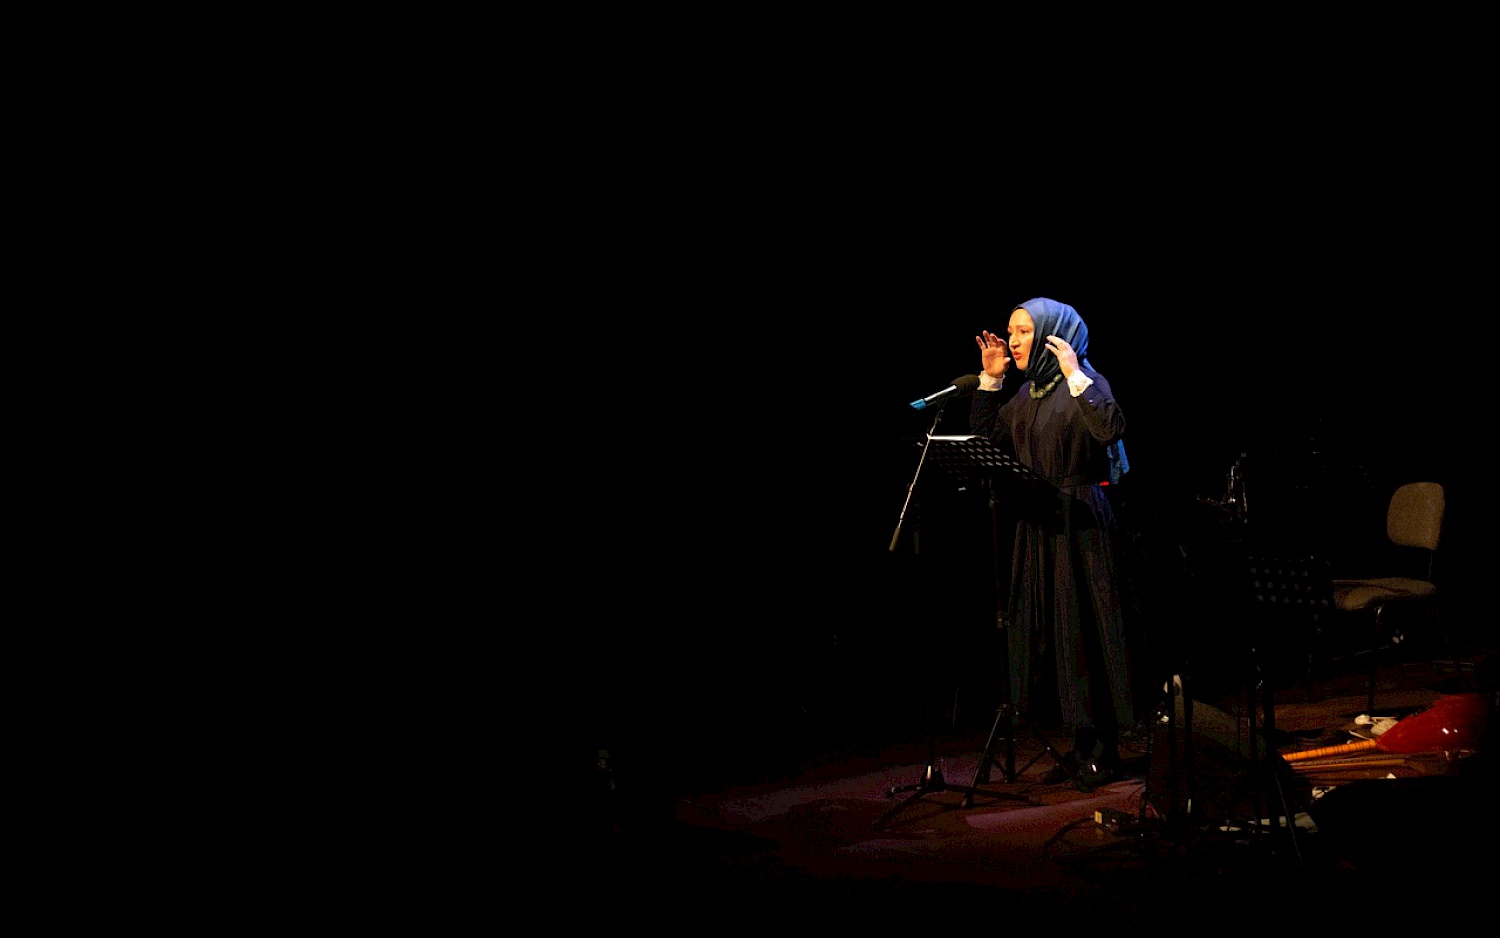 A mainly dark picture, with the focus on Kübra Gümüşay, who performs an essay on stage.